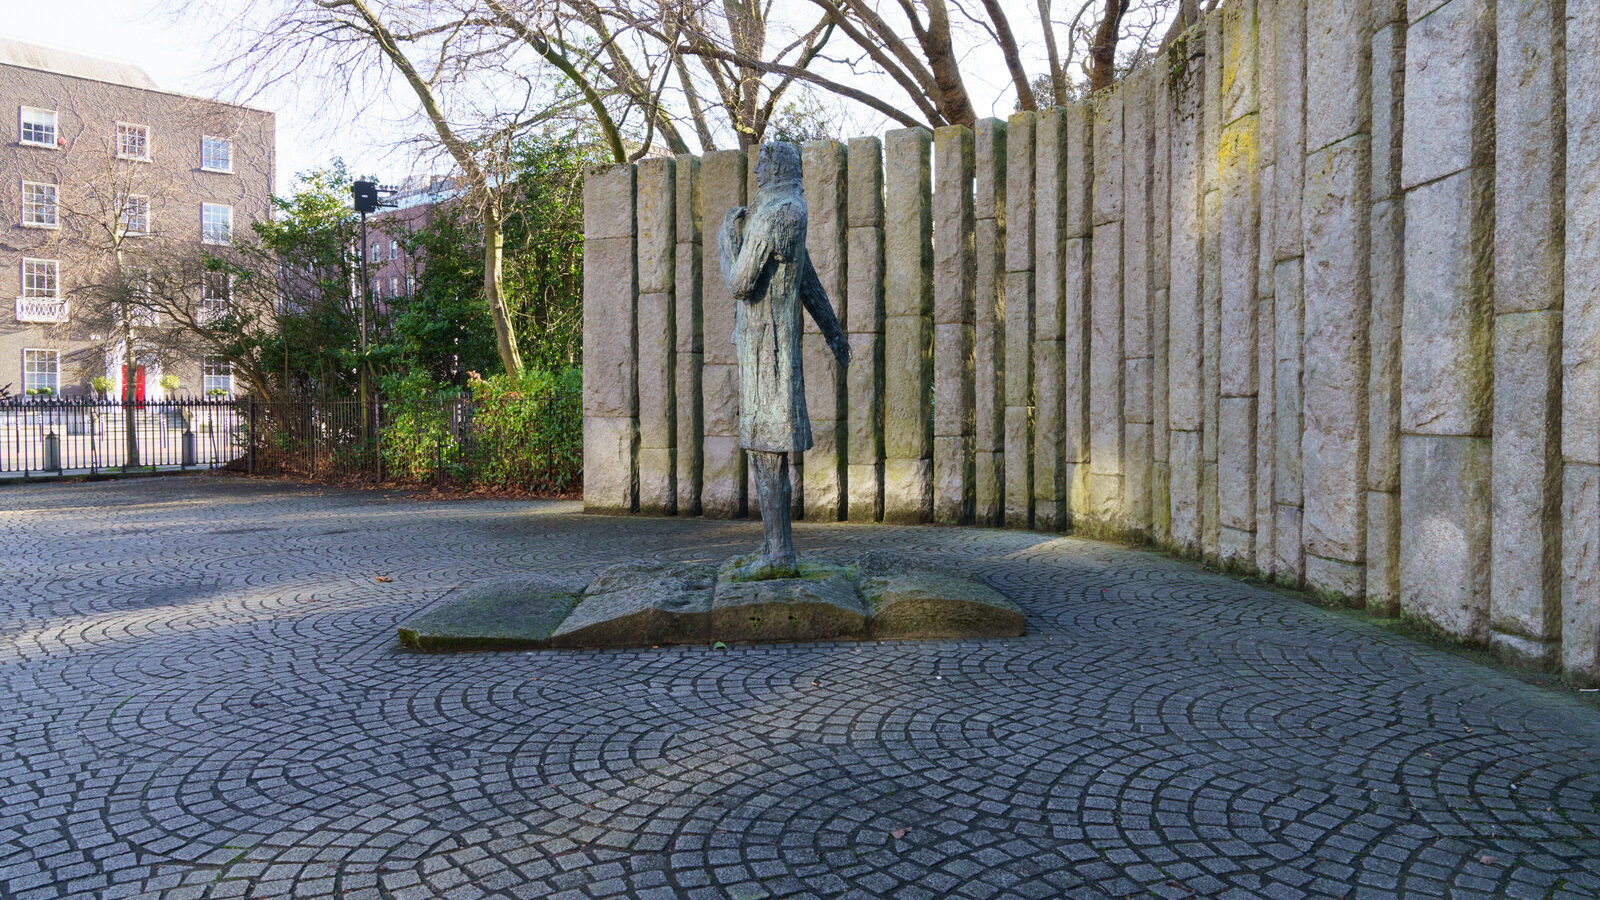 WOLFE TONE BY EDWARD DELANEY [I LIKE THE SETTING AT THE CORNER OF STEPHEN'S GREEN]-228104-1